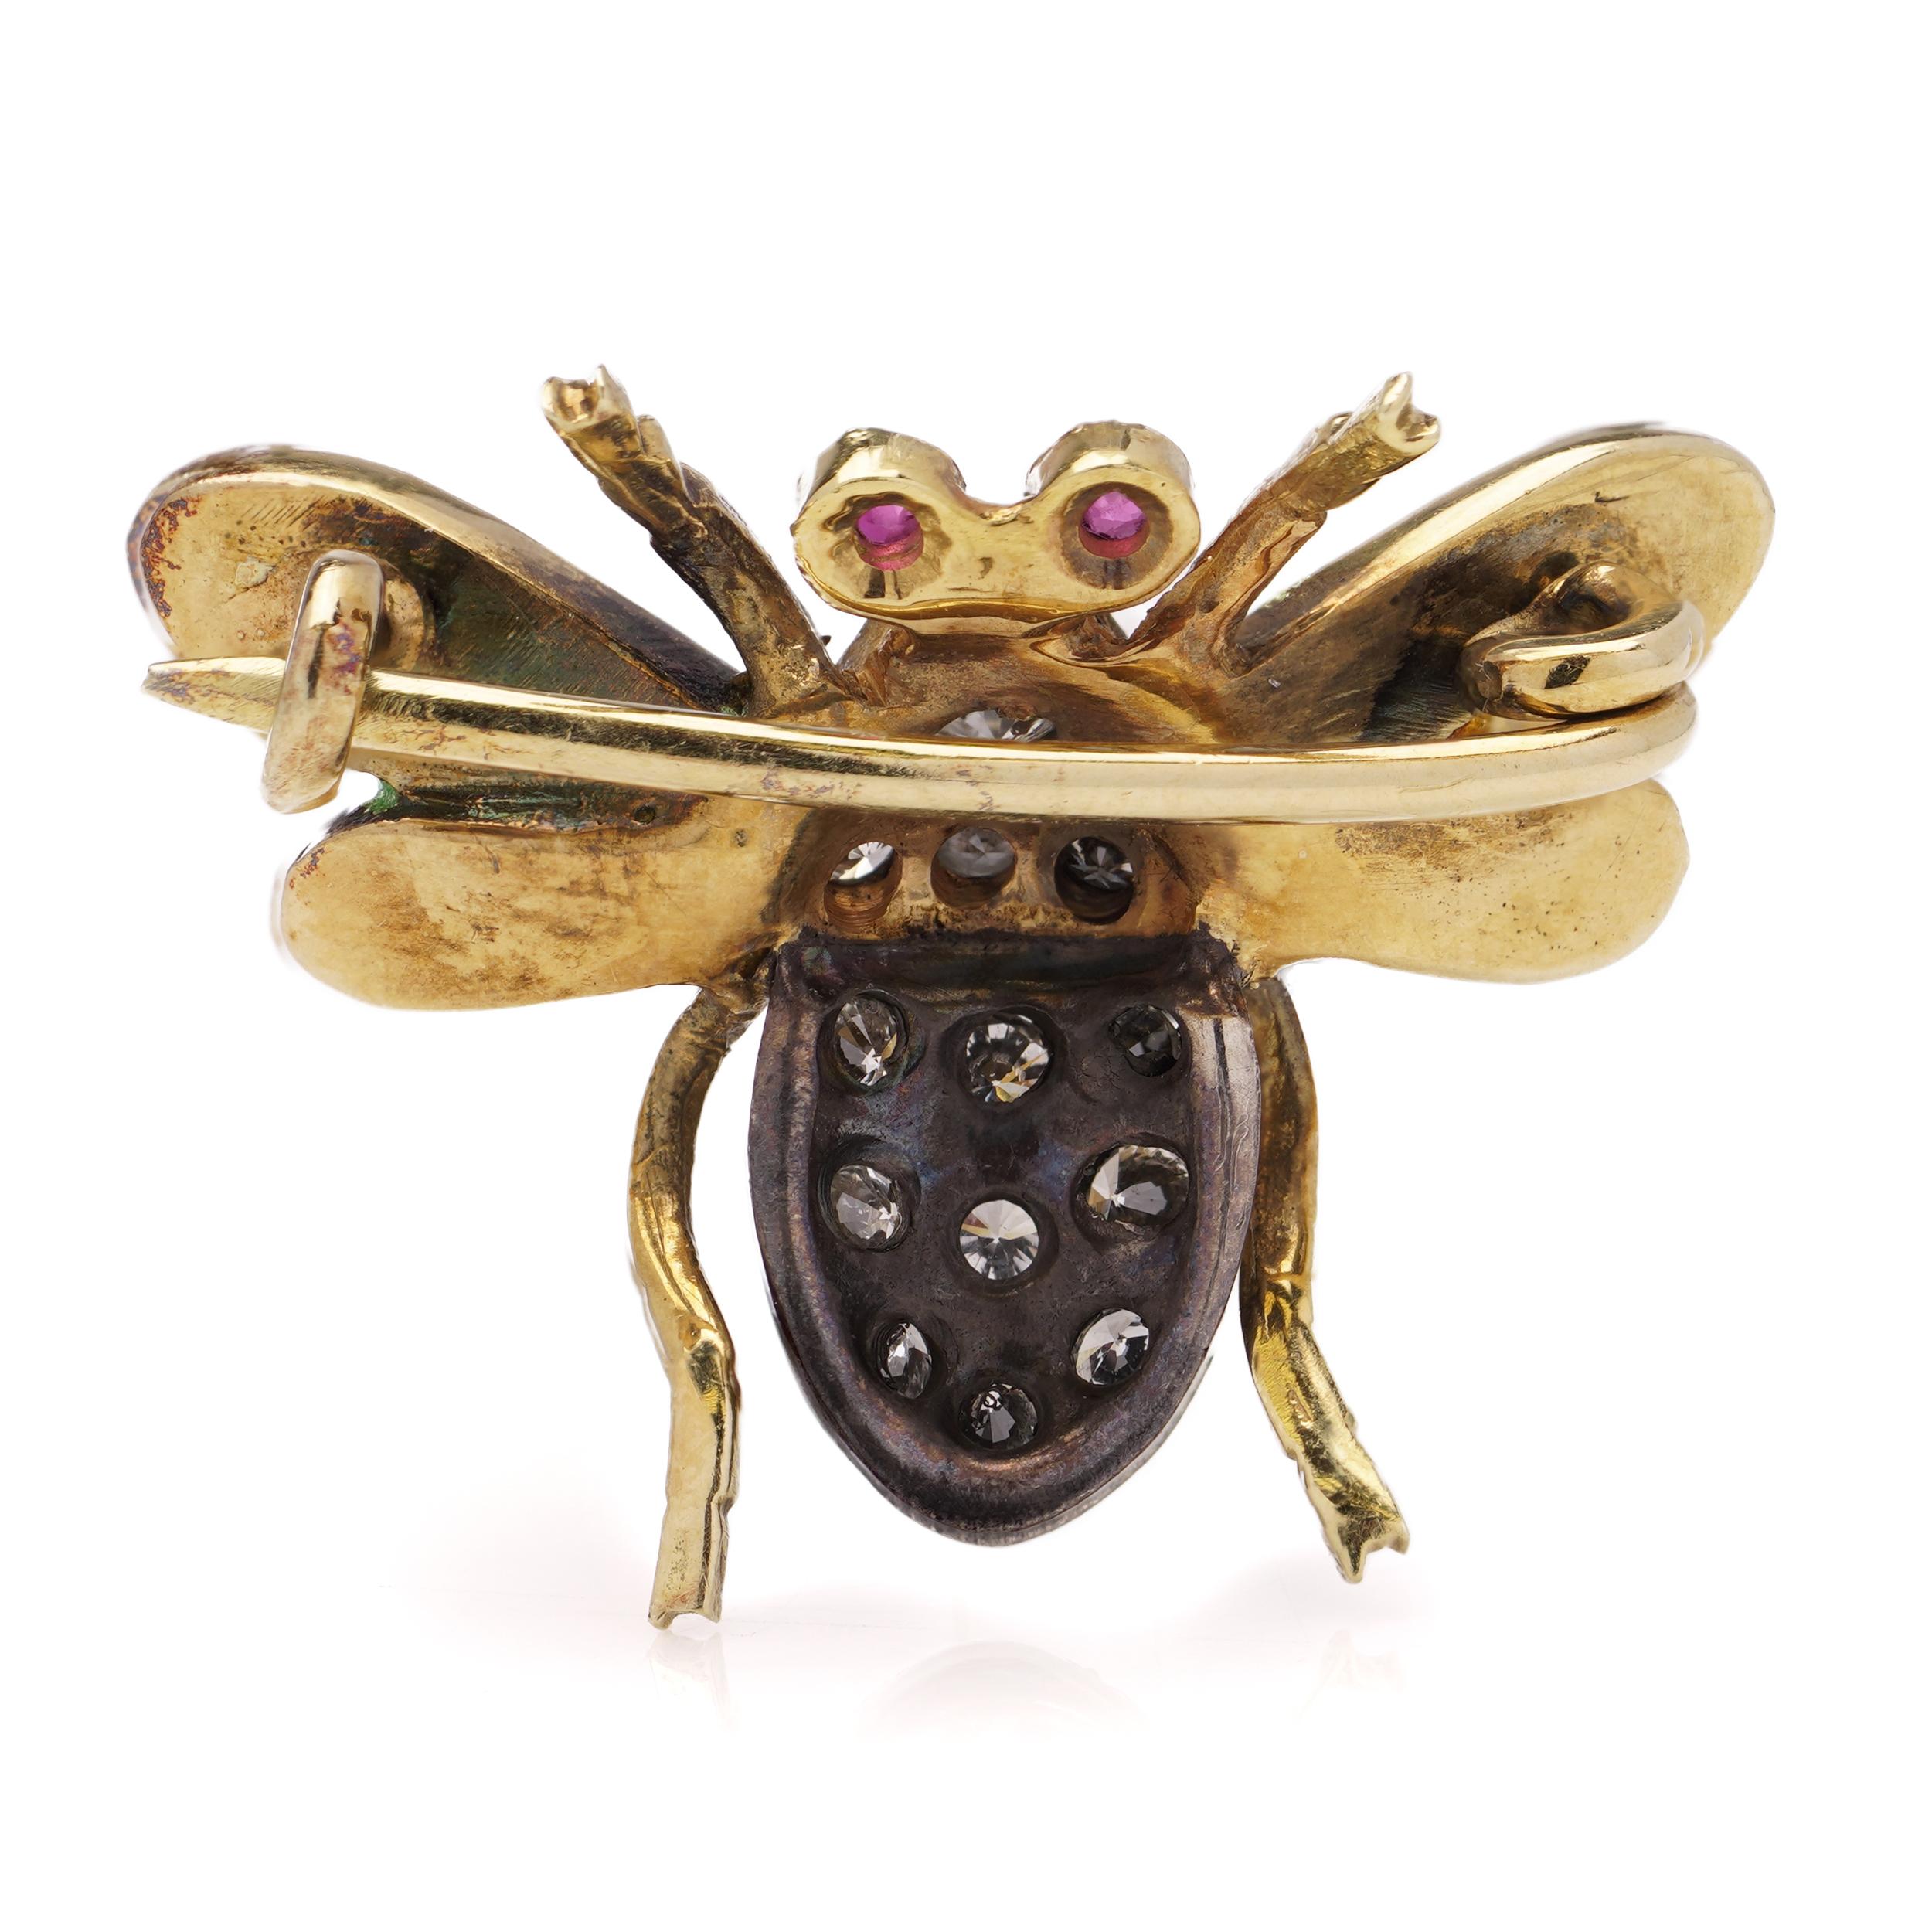  Edwardian 18kt. yellow gold and silver open-winged insect brooch For Sale 4